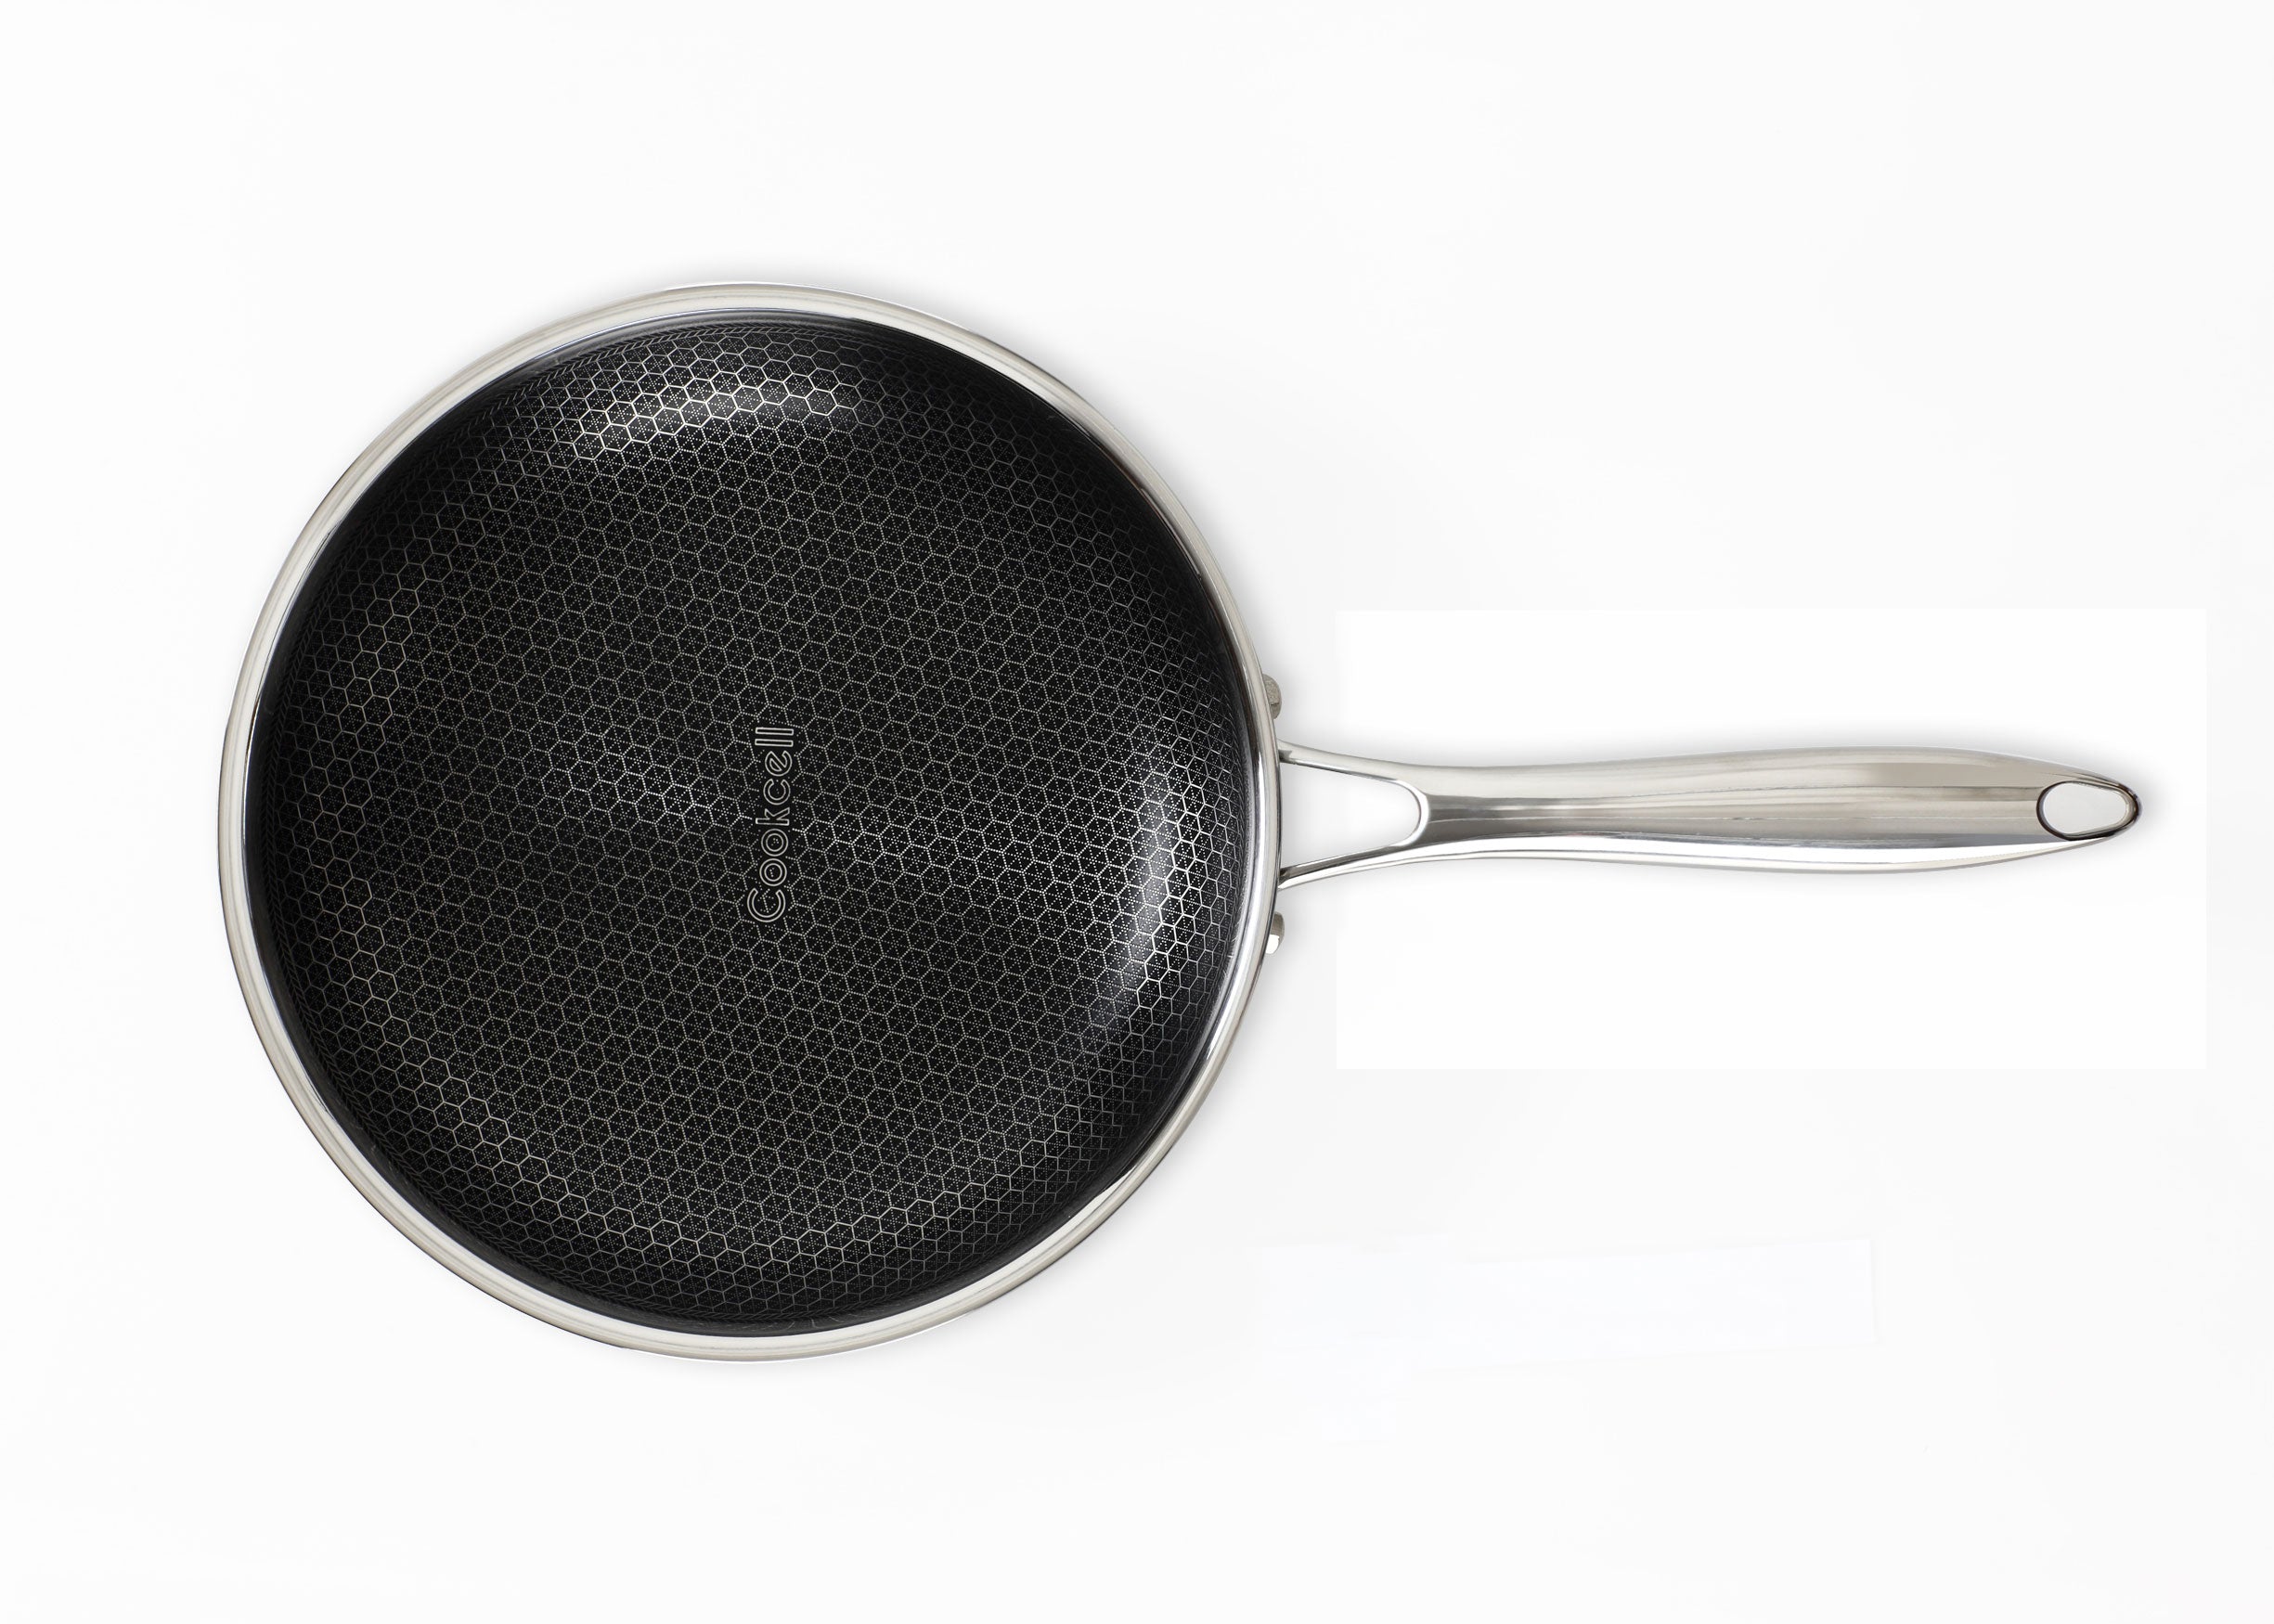 COOKCELL Stainless Steel Non-stick Hybrid Wok 30cm